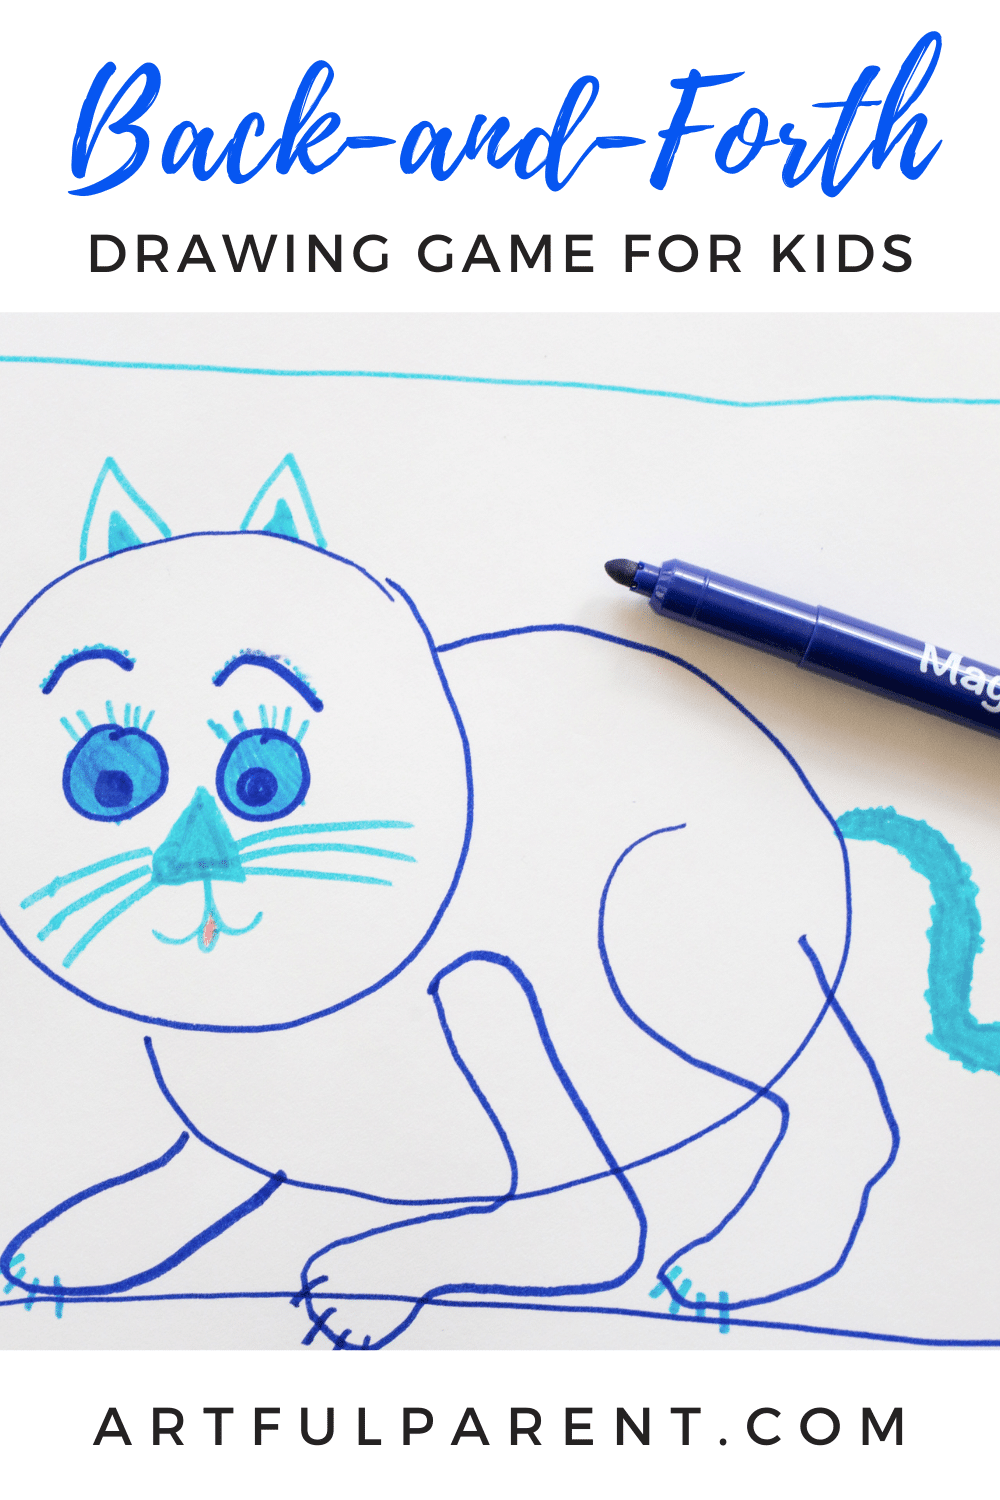 A Back-and-Forth Drawing Game for Kids